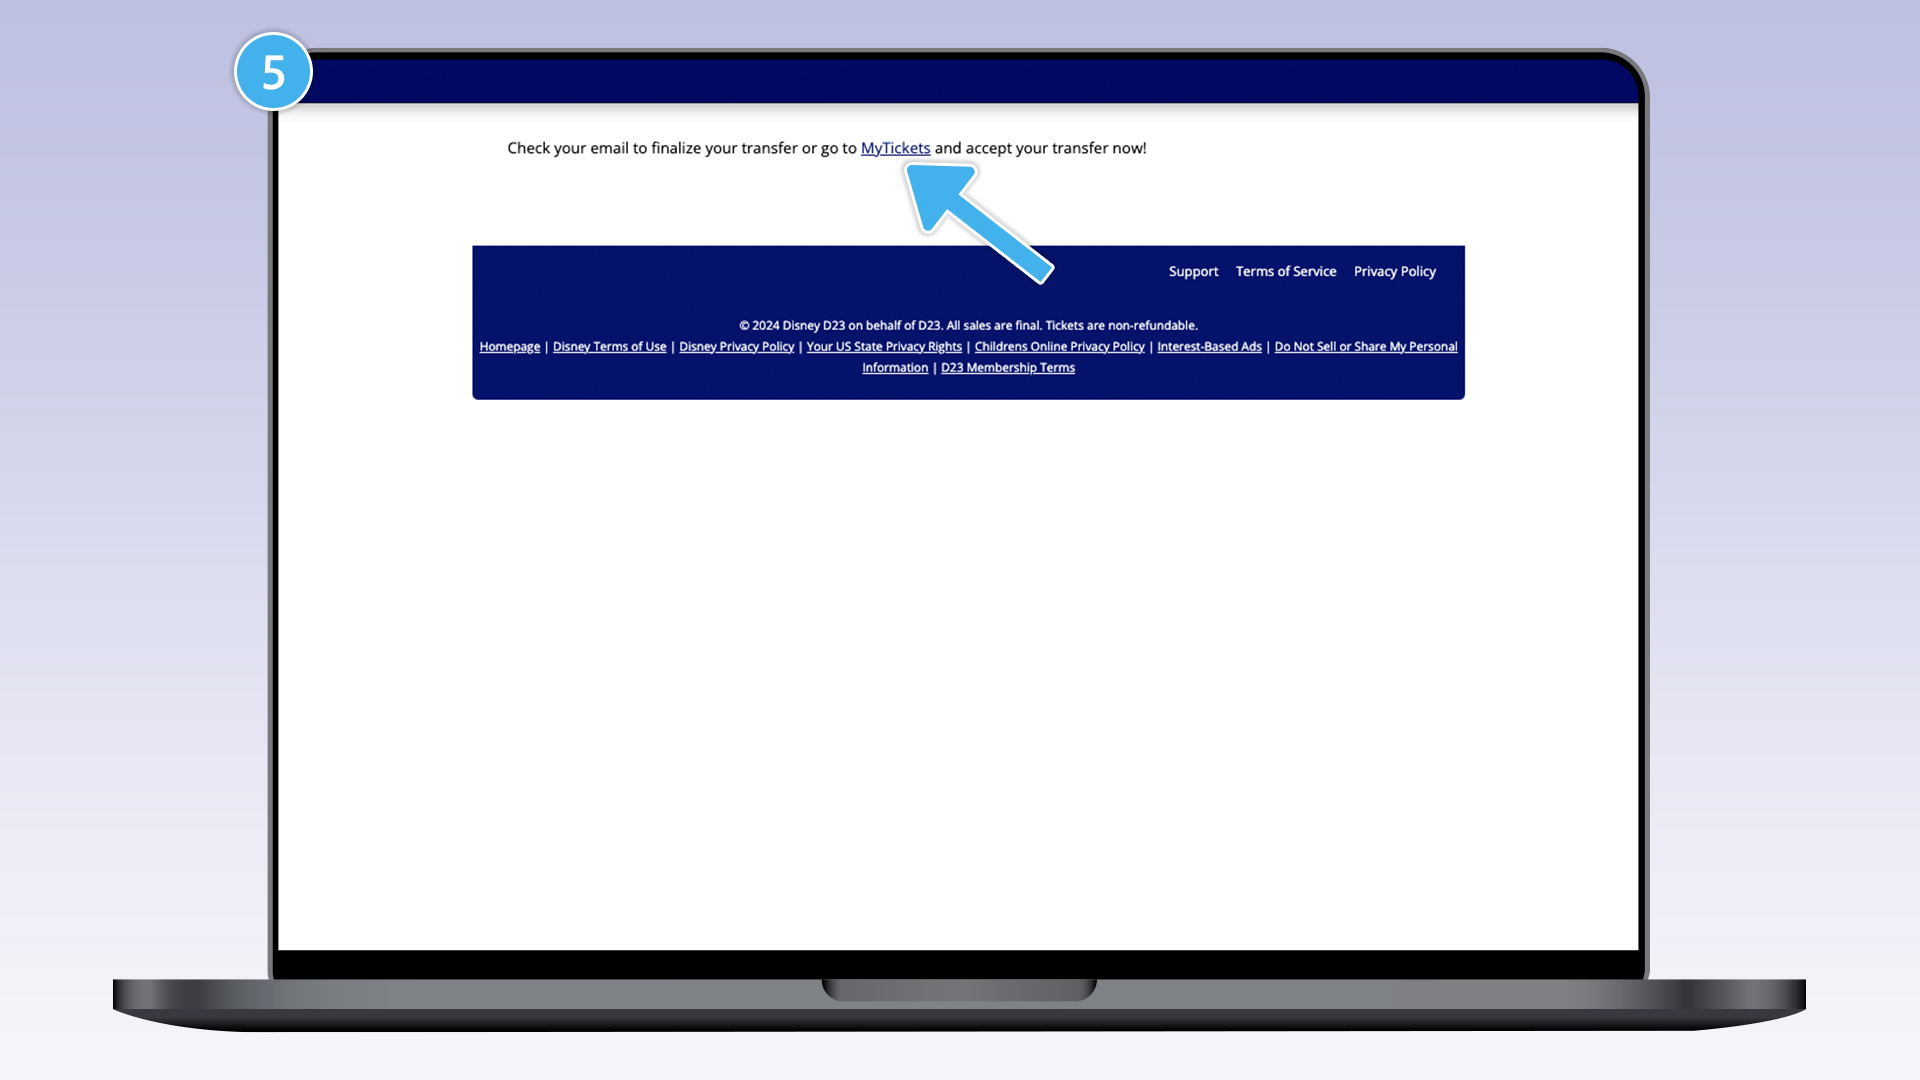 A laptop labeled “5” shows a screenshot of the completion screen after the form is submitted. It reads, “Check your email to finalize your transfer or go to “MyTickets” and accept your transfer now! 